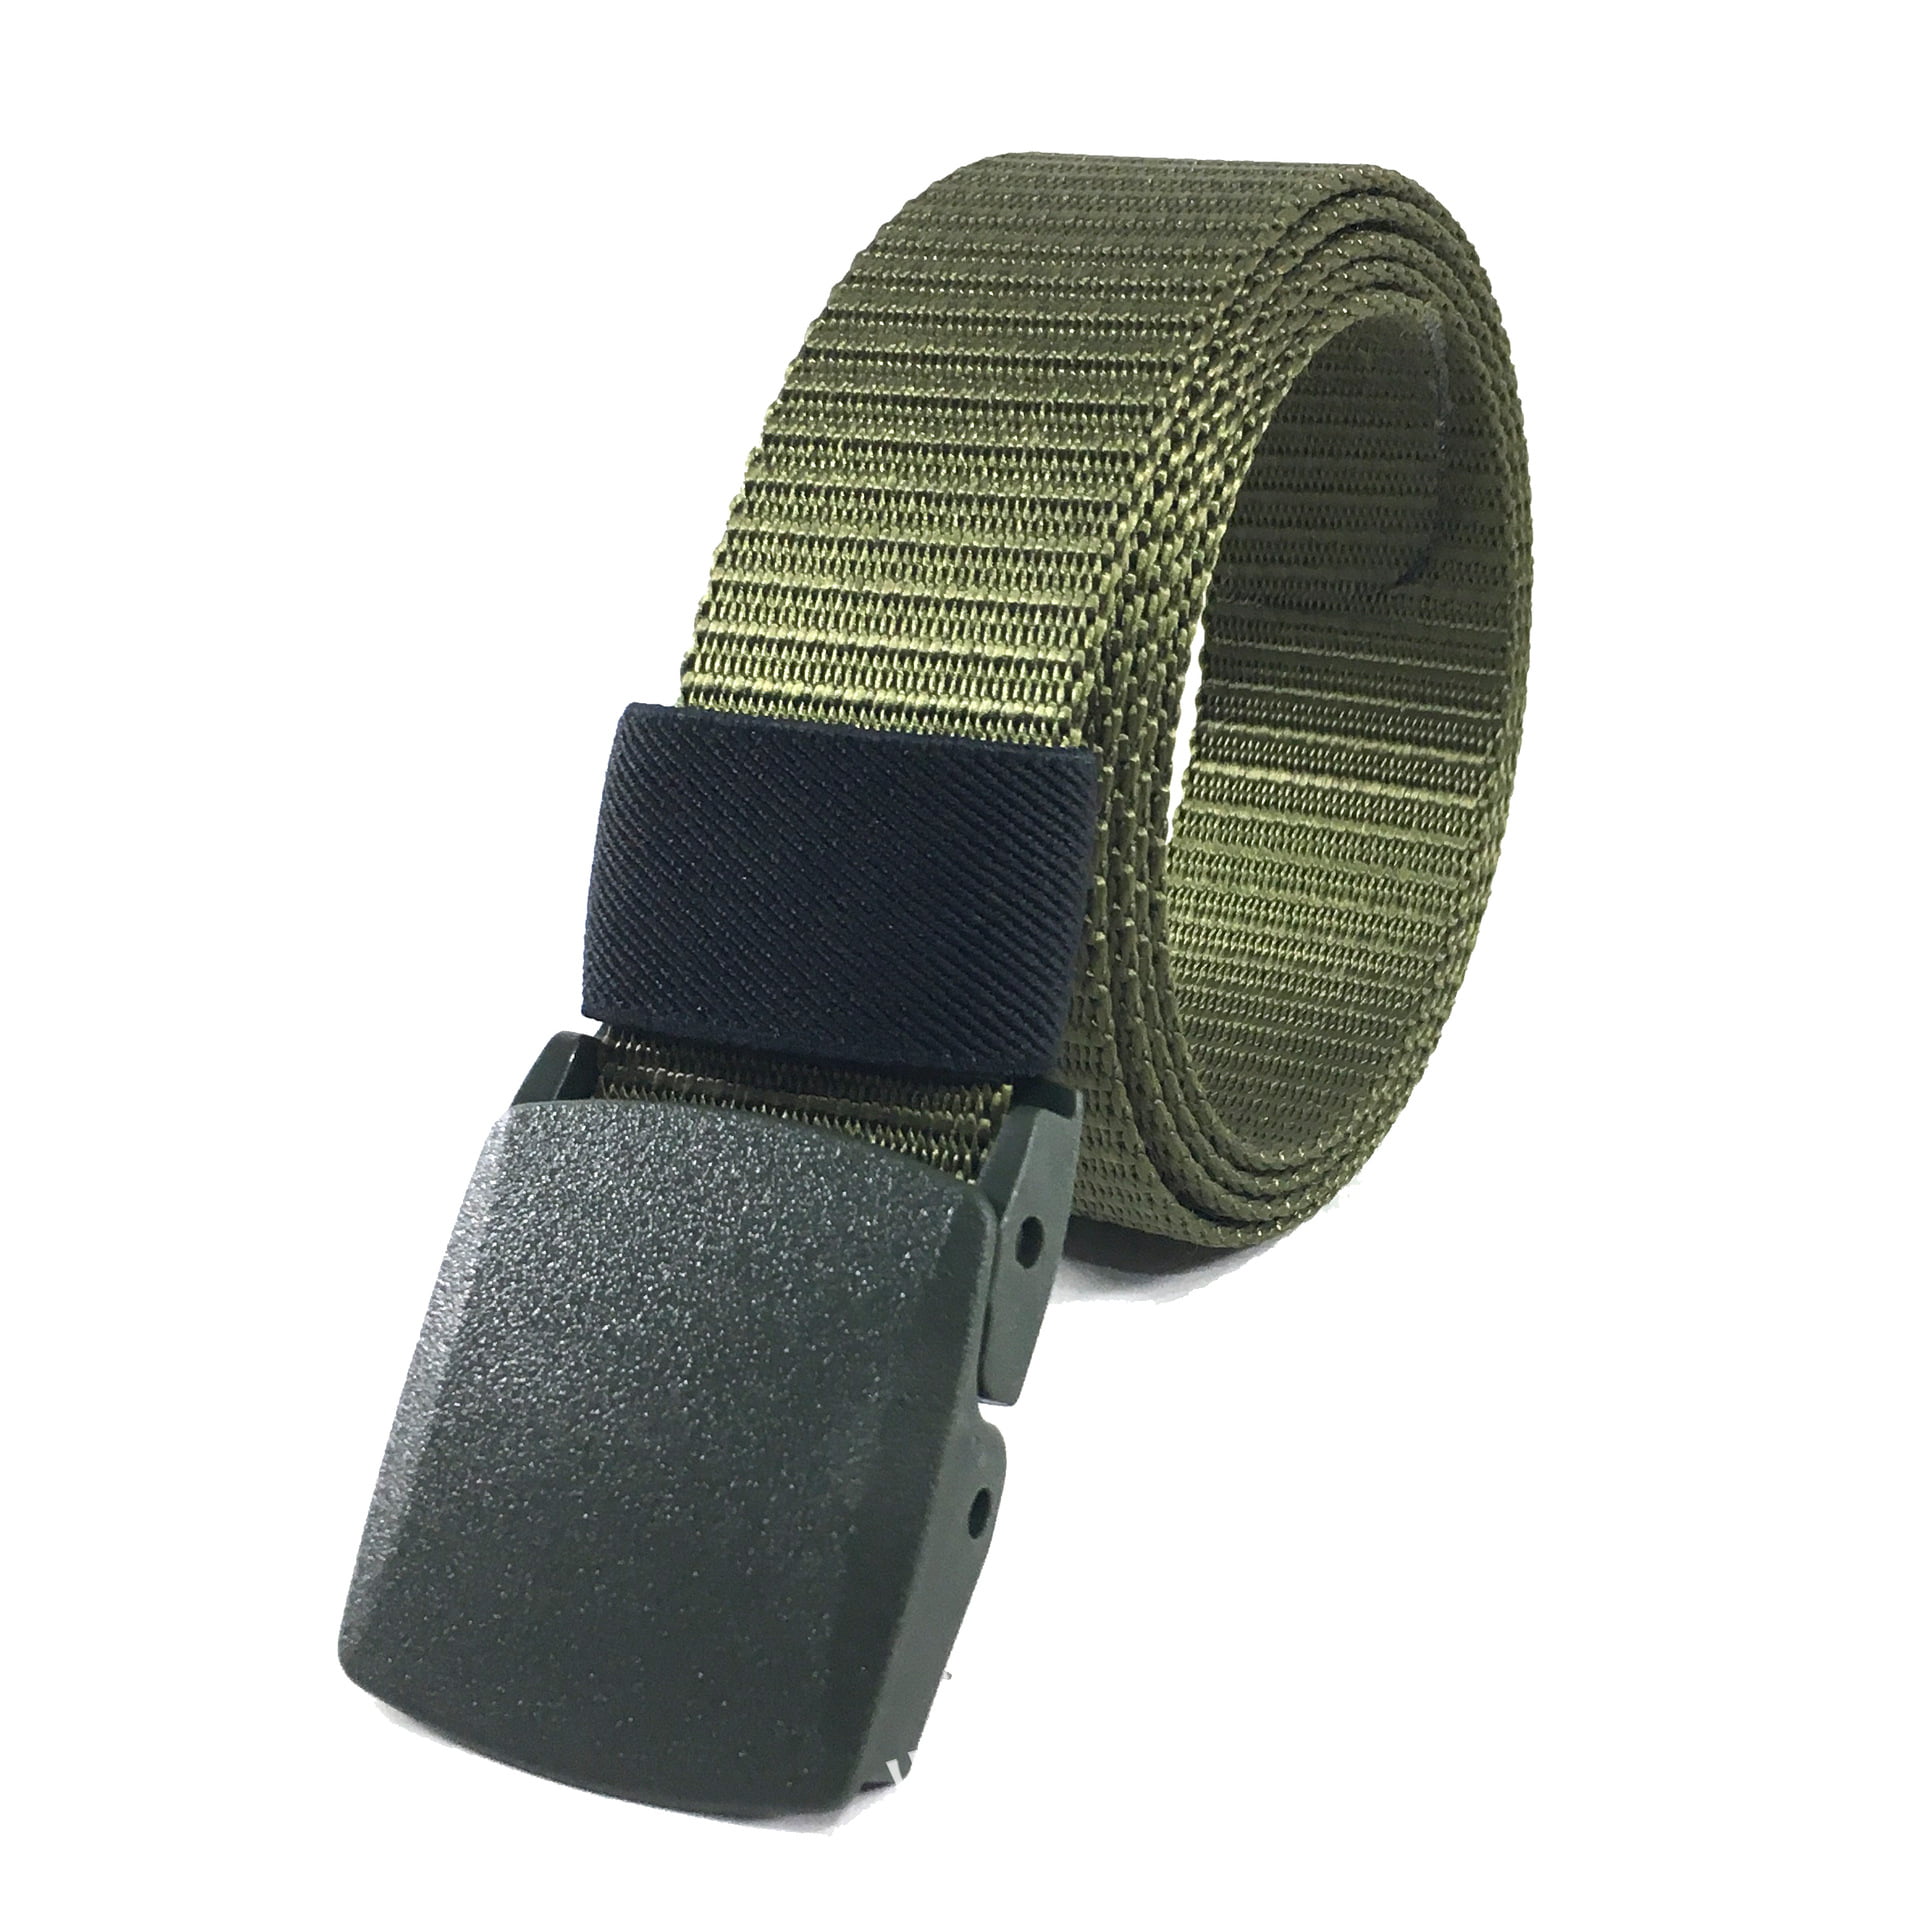 AXBXCX Non-Slip Tactical Belt Outdoor Military Nylon Webbing 1.5 Riggers Web Belt with Metal Buckle